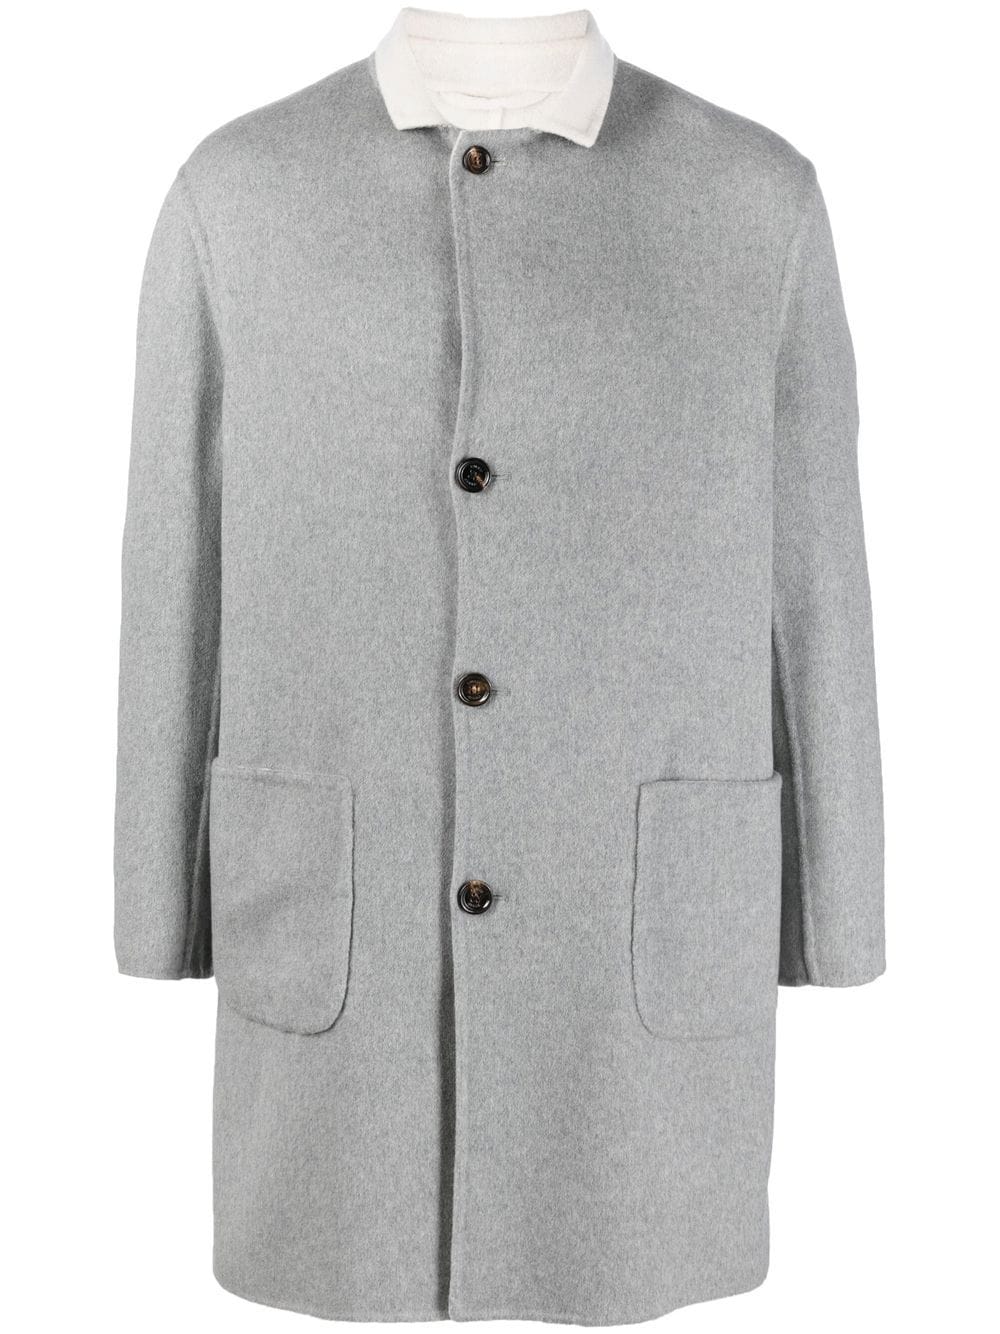 Kired single-breasted Cashmere Coat - Farfetch